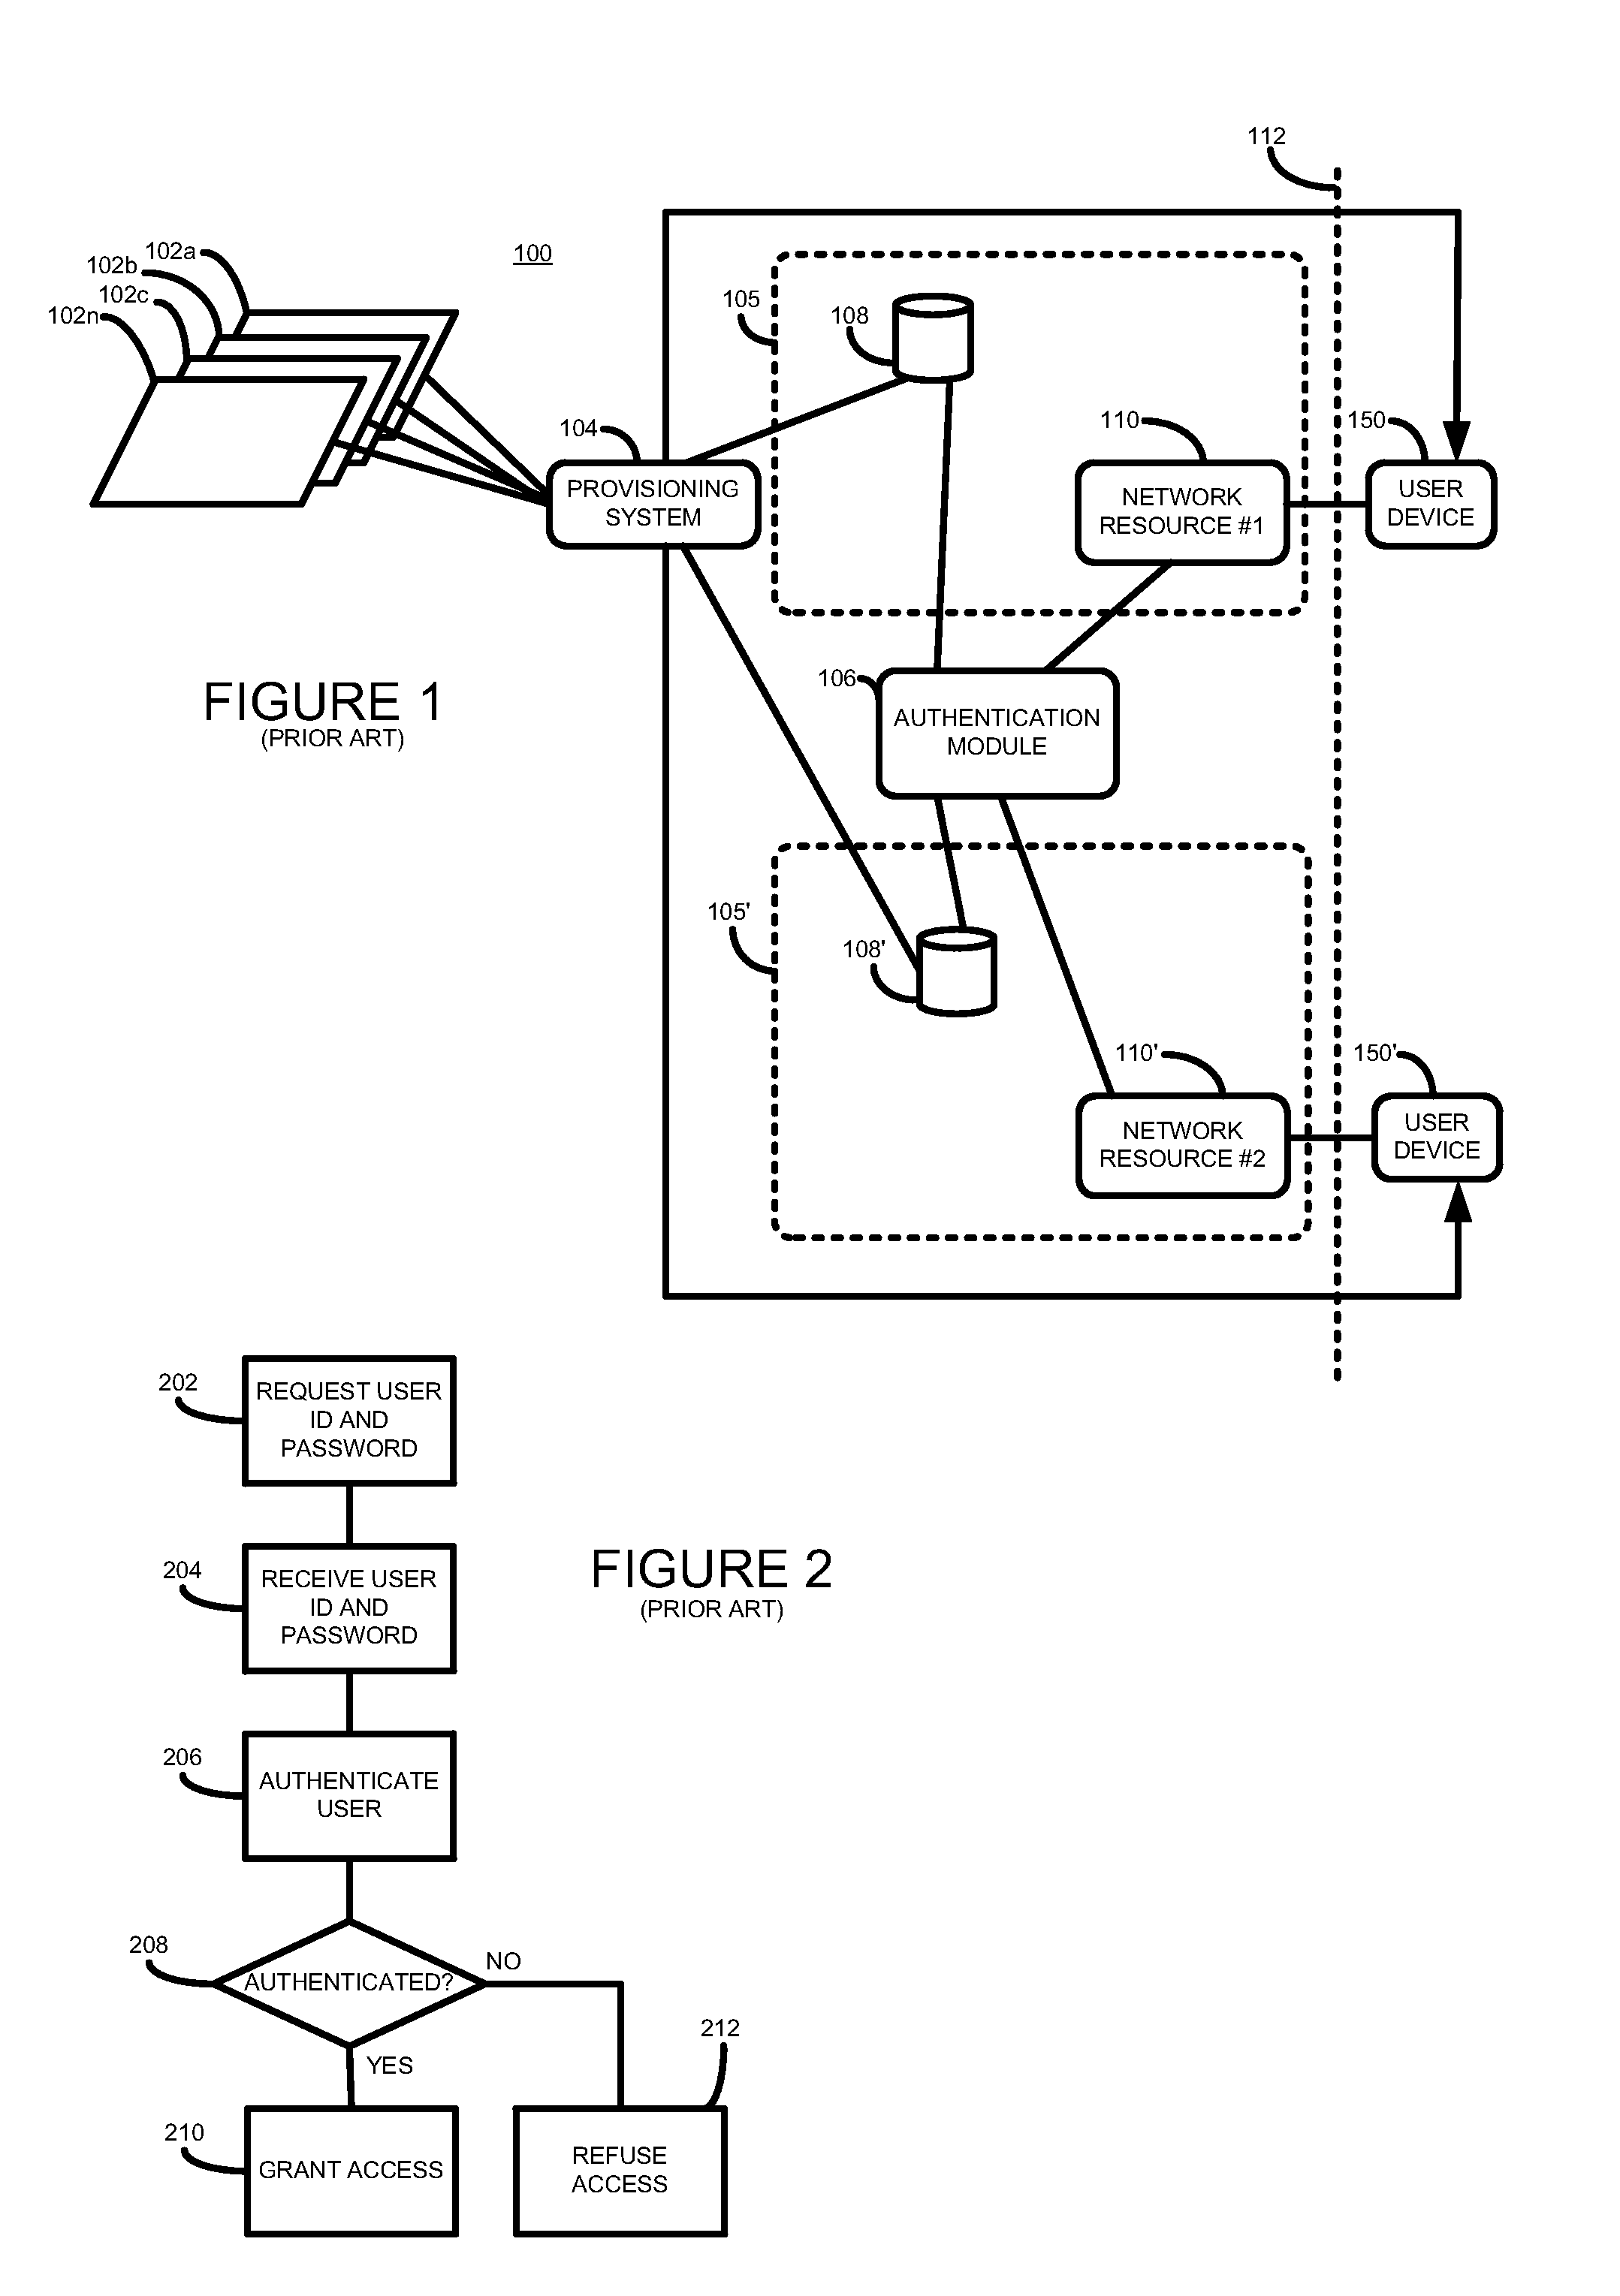 Method and apparatus for controlling access to a network resource